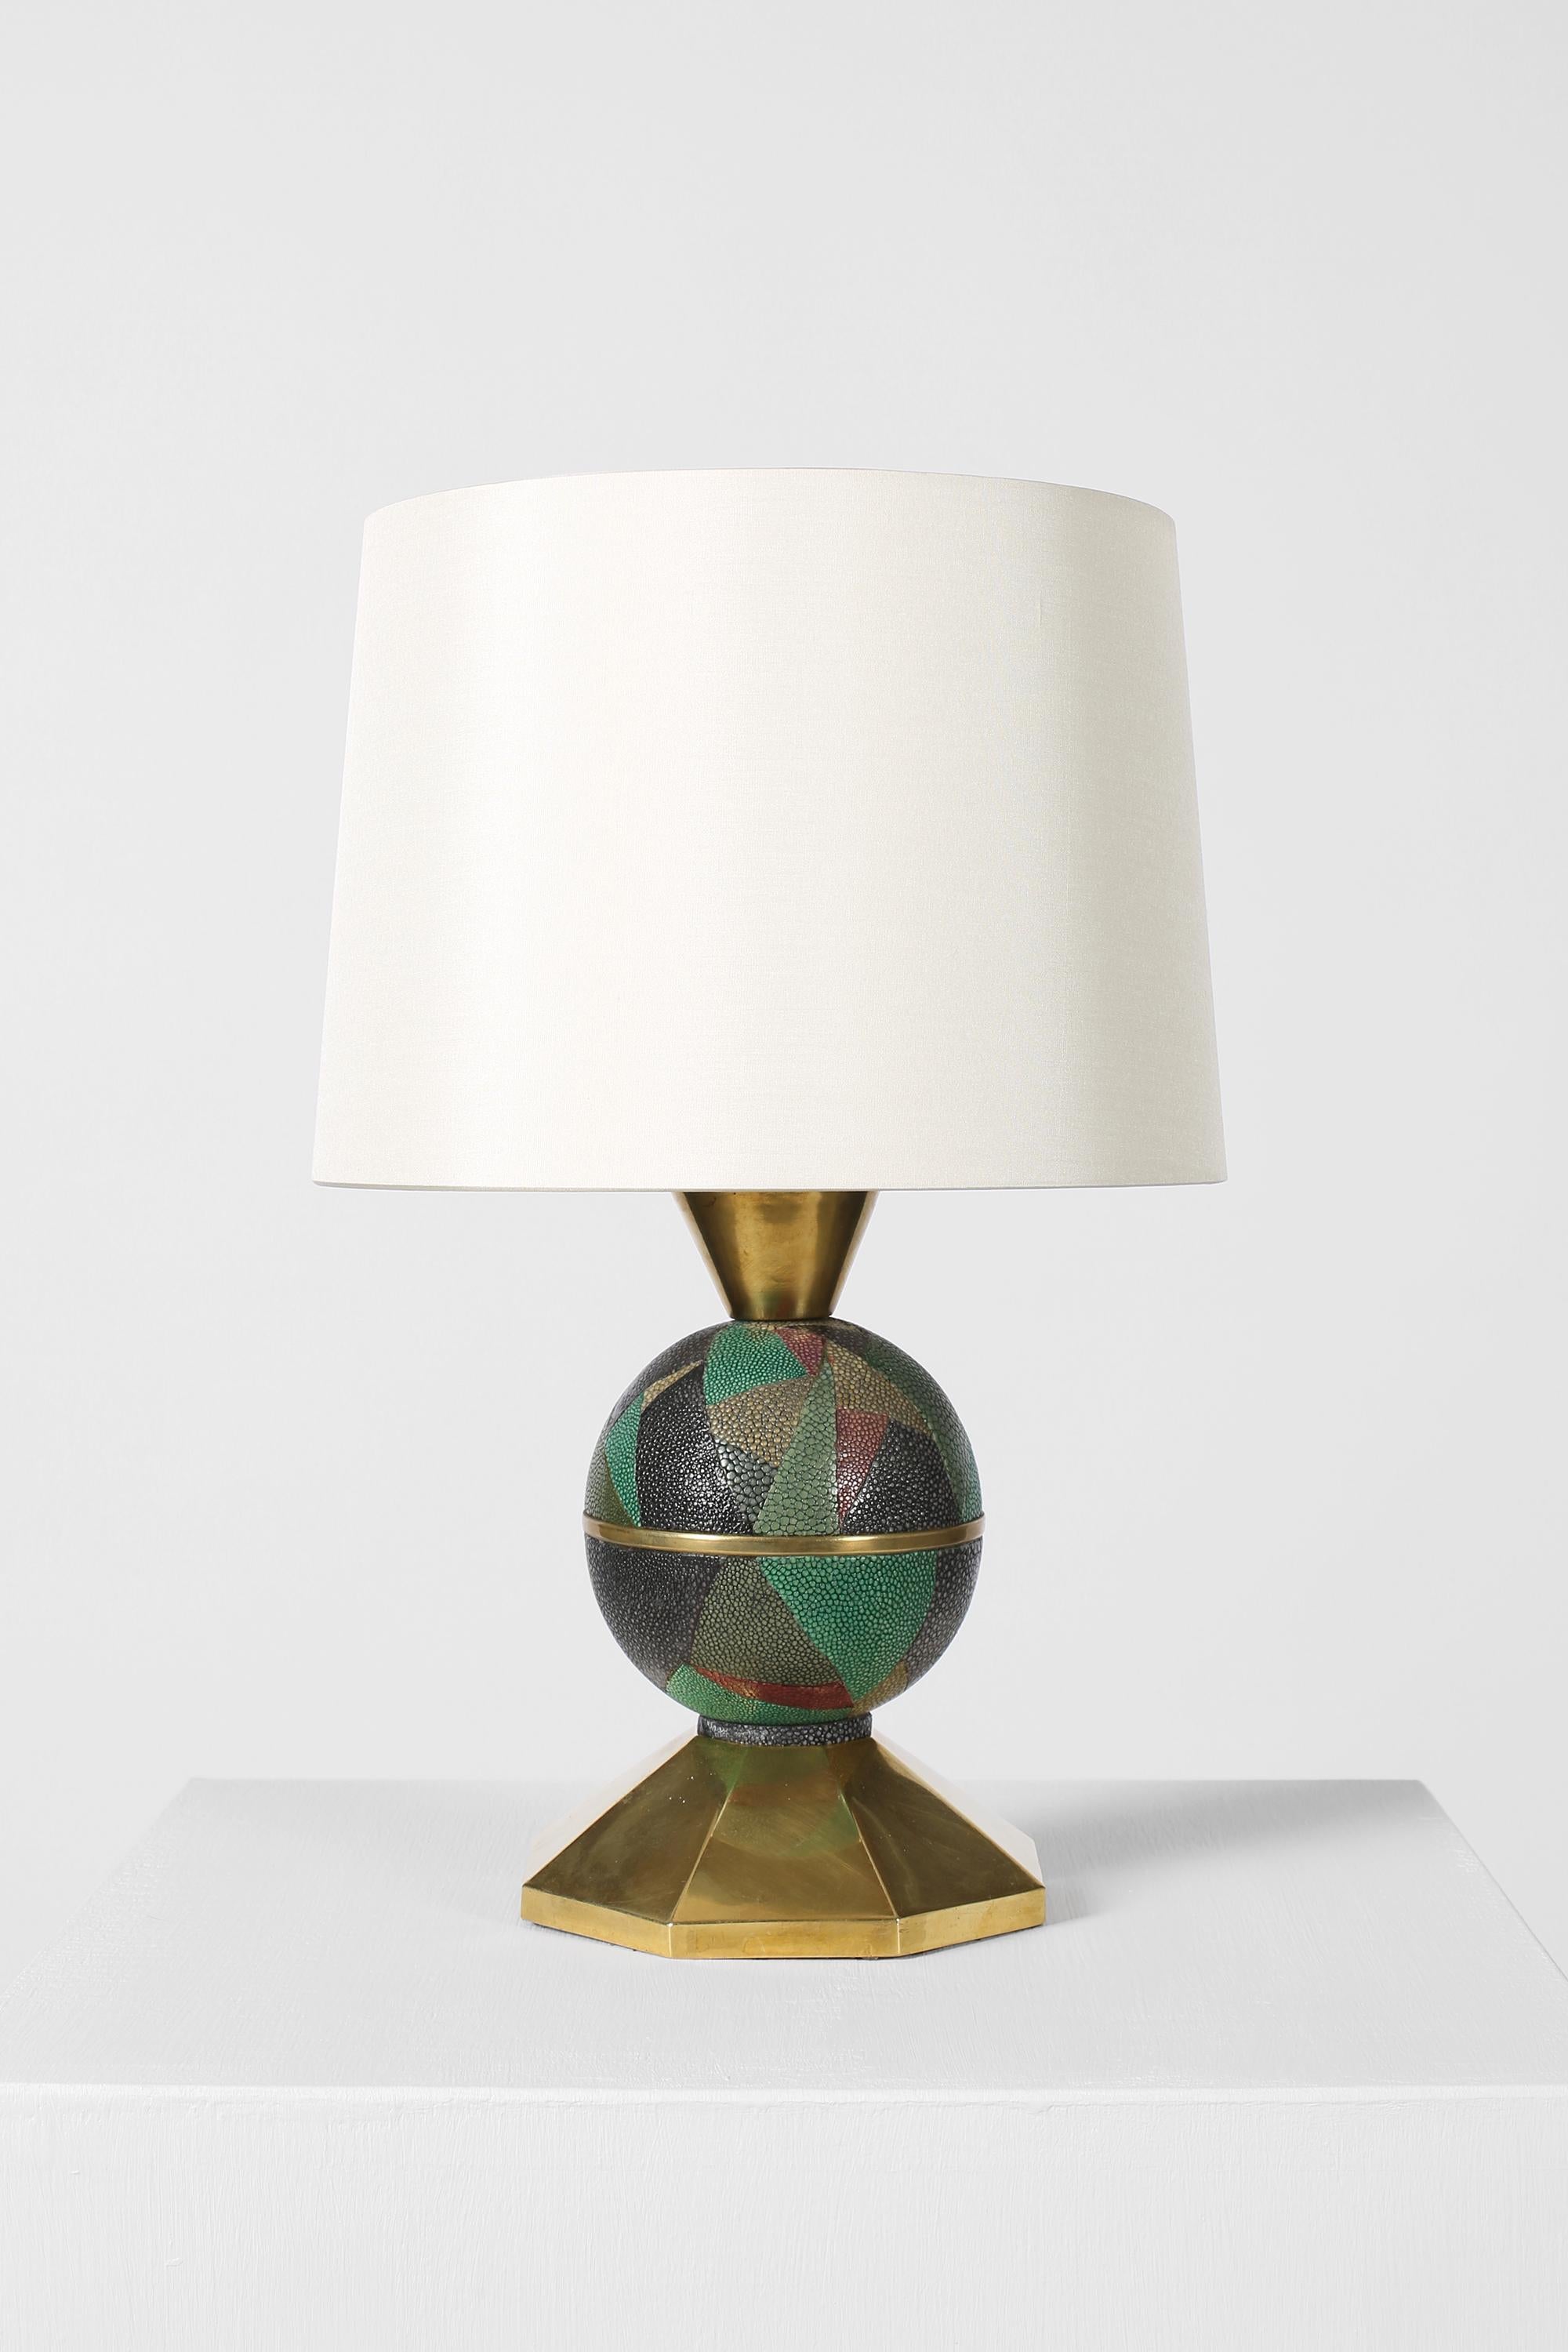 A rare gilt bronze and galuchat clad table lamp attributed to André Groult (1884-1966). Stamped A.G with hallmark to the base. French, c. 1930s. Supplied with an off white dupion silk shade.